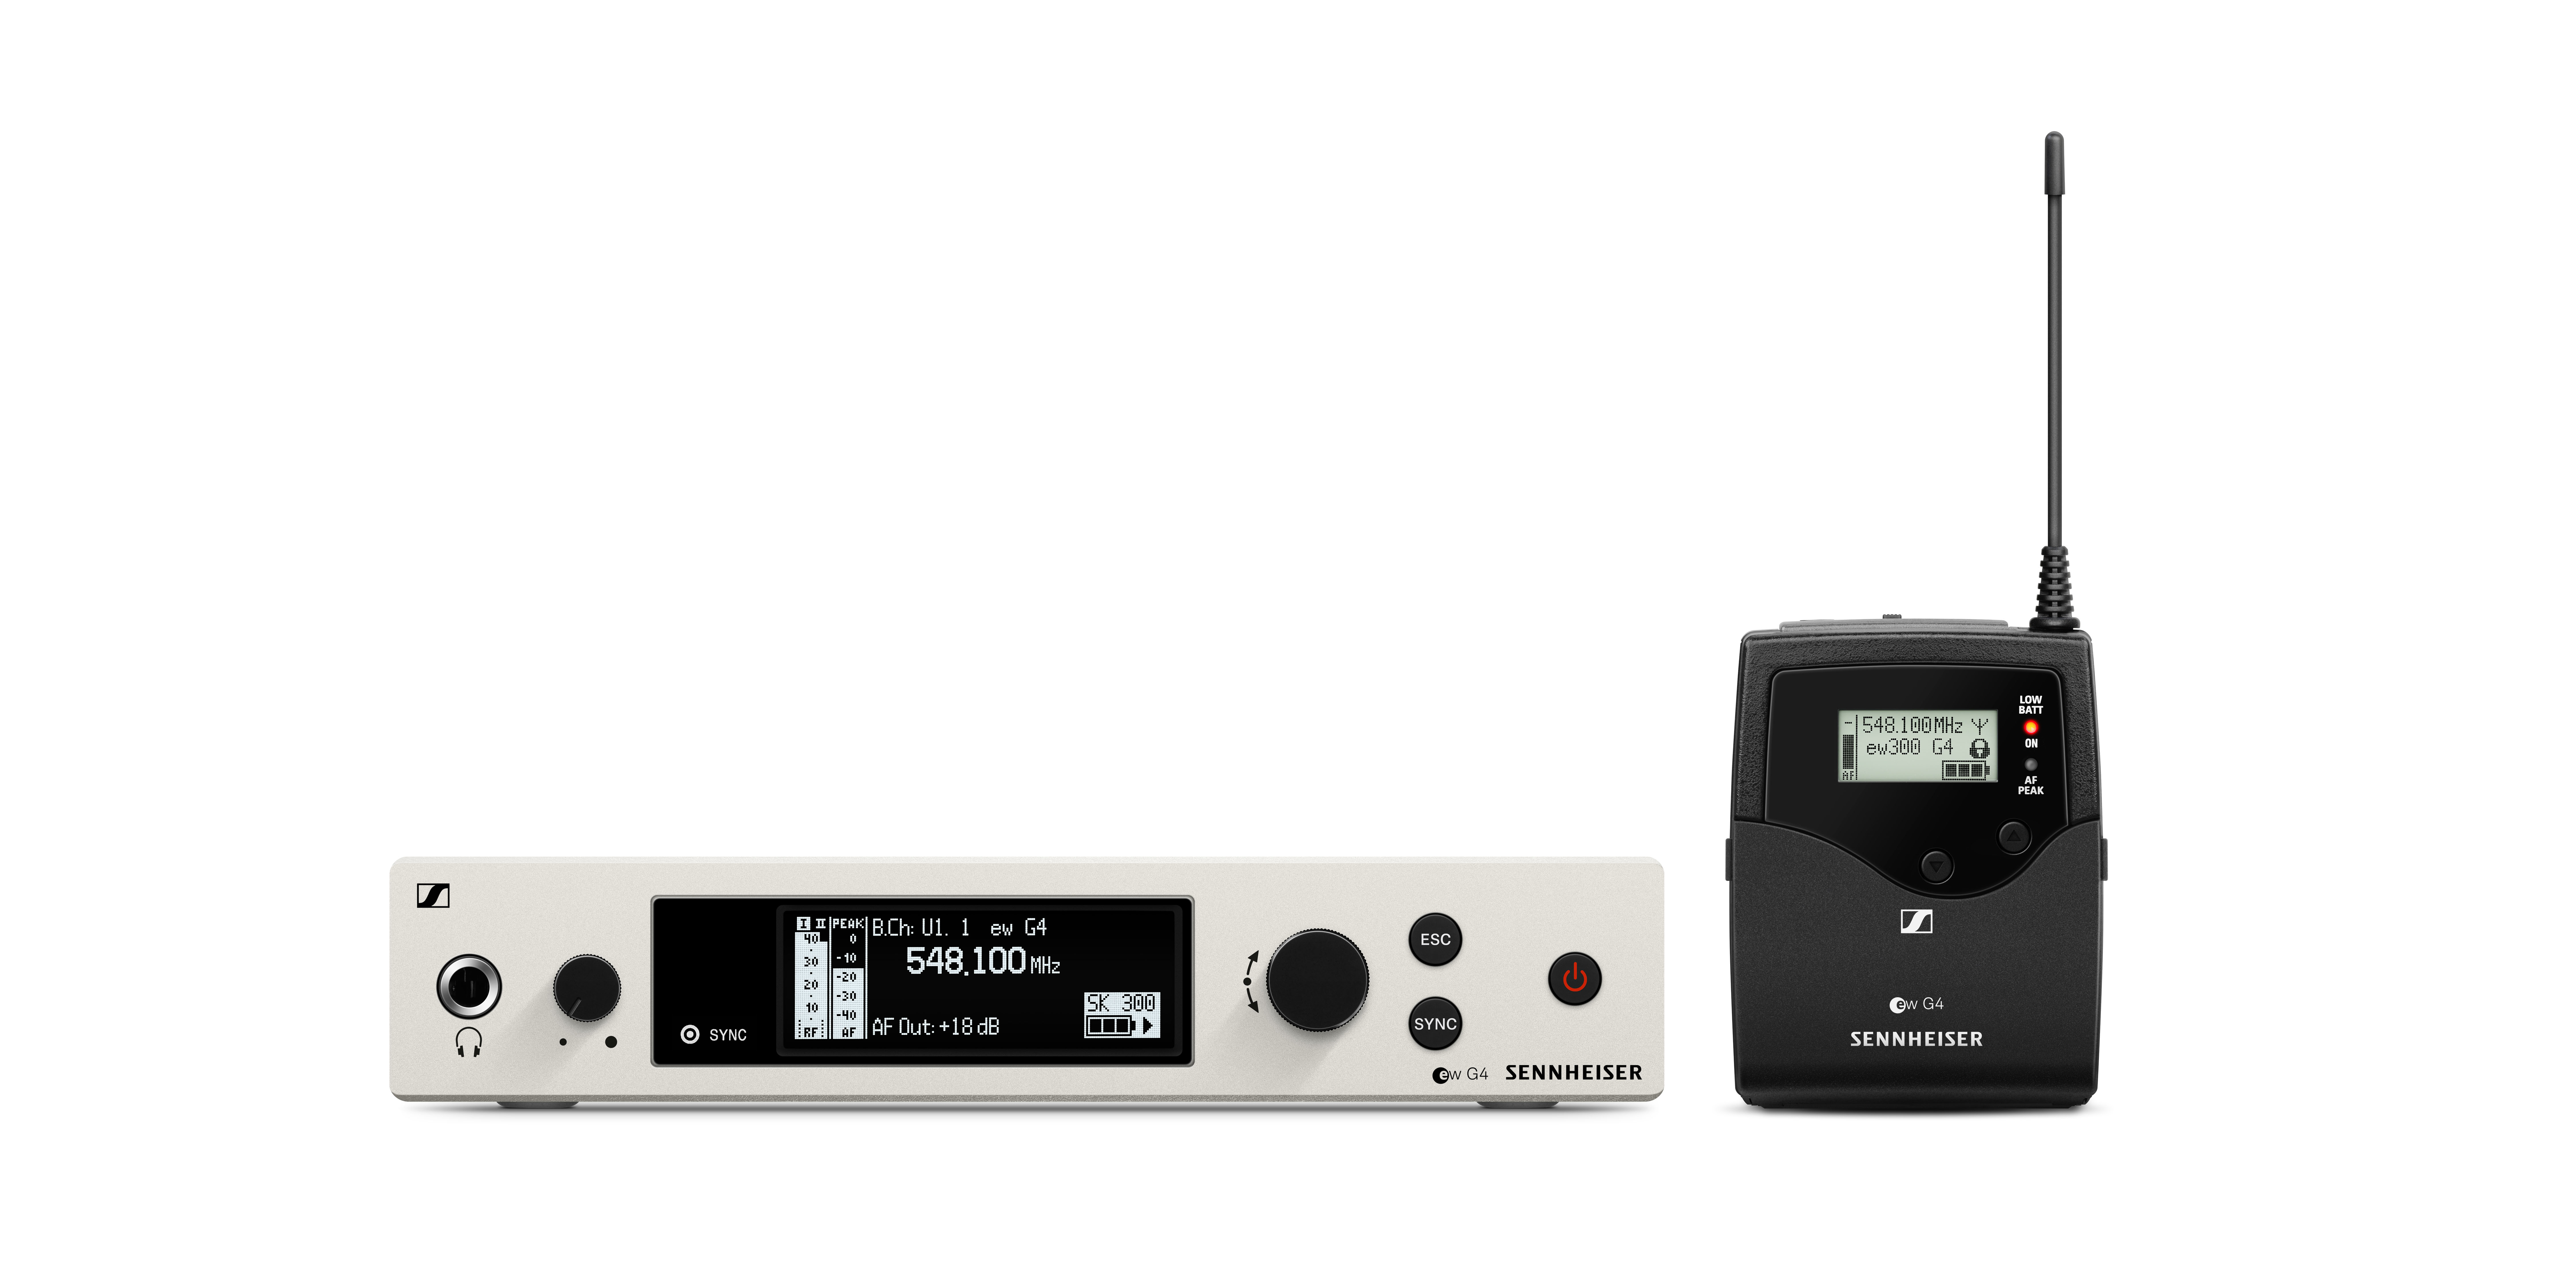 evolution wireless G4 – the fourth generation makes professional wireless microphone technology even more simple, flexible and reliable
​
On BIMobject:
EM 300-500 G4 rack-mount receiver
EM 100 G4 rack-mount receiver